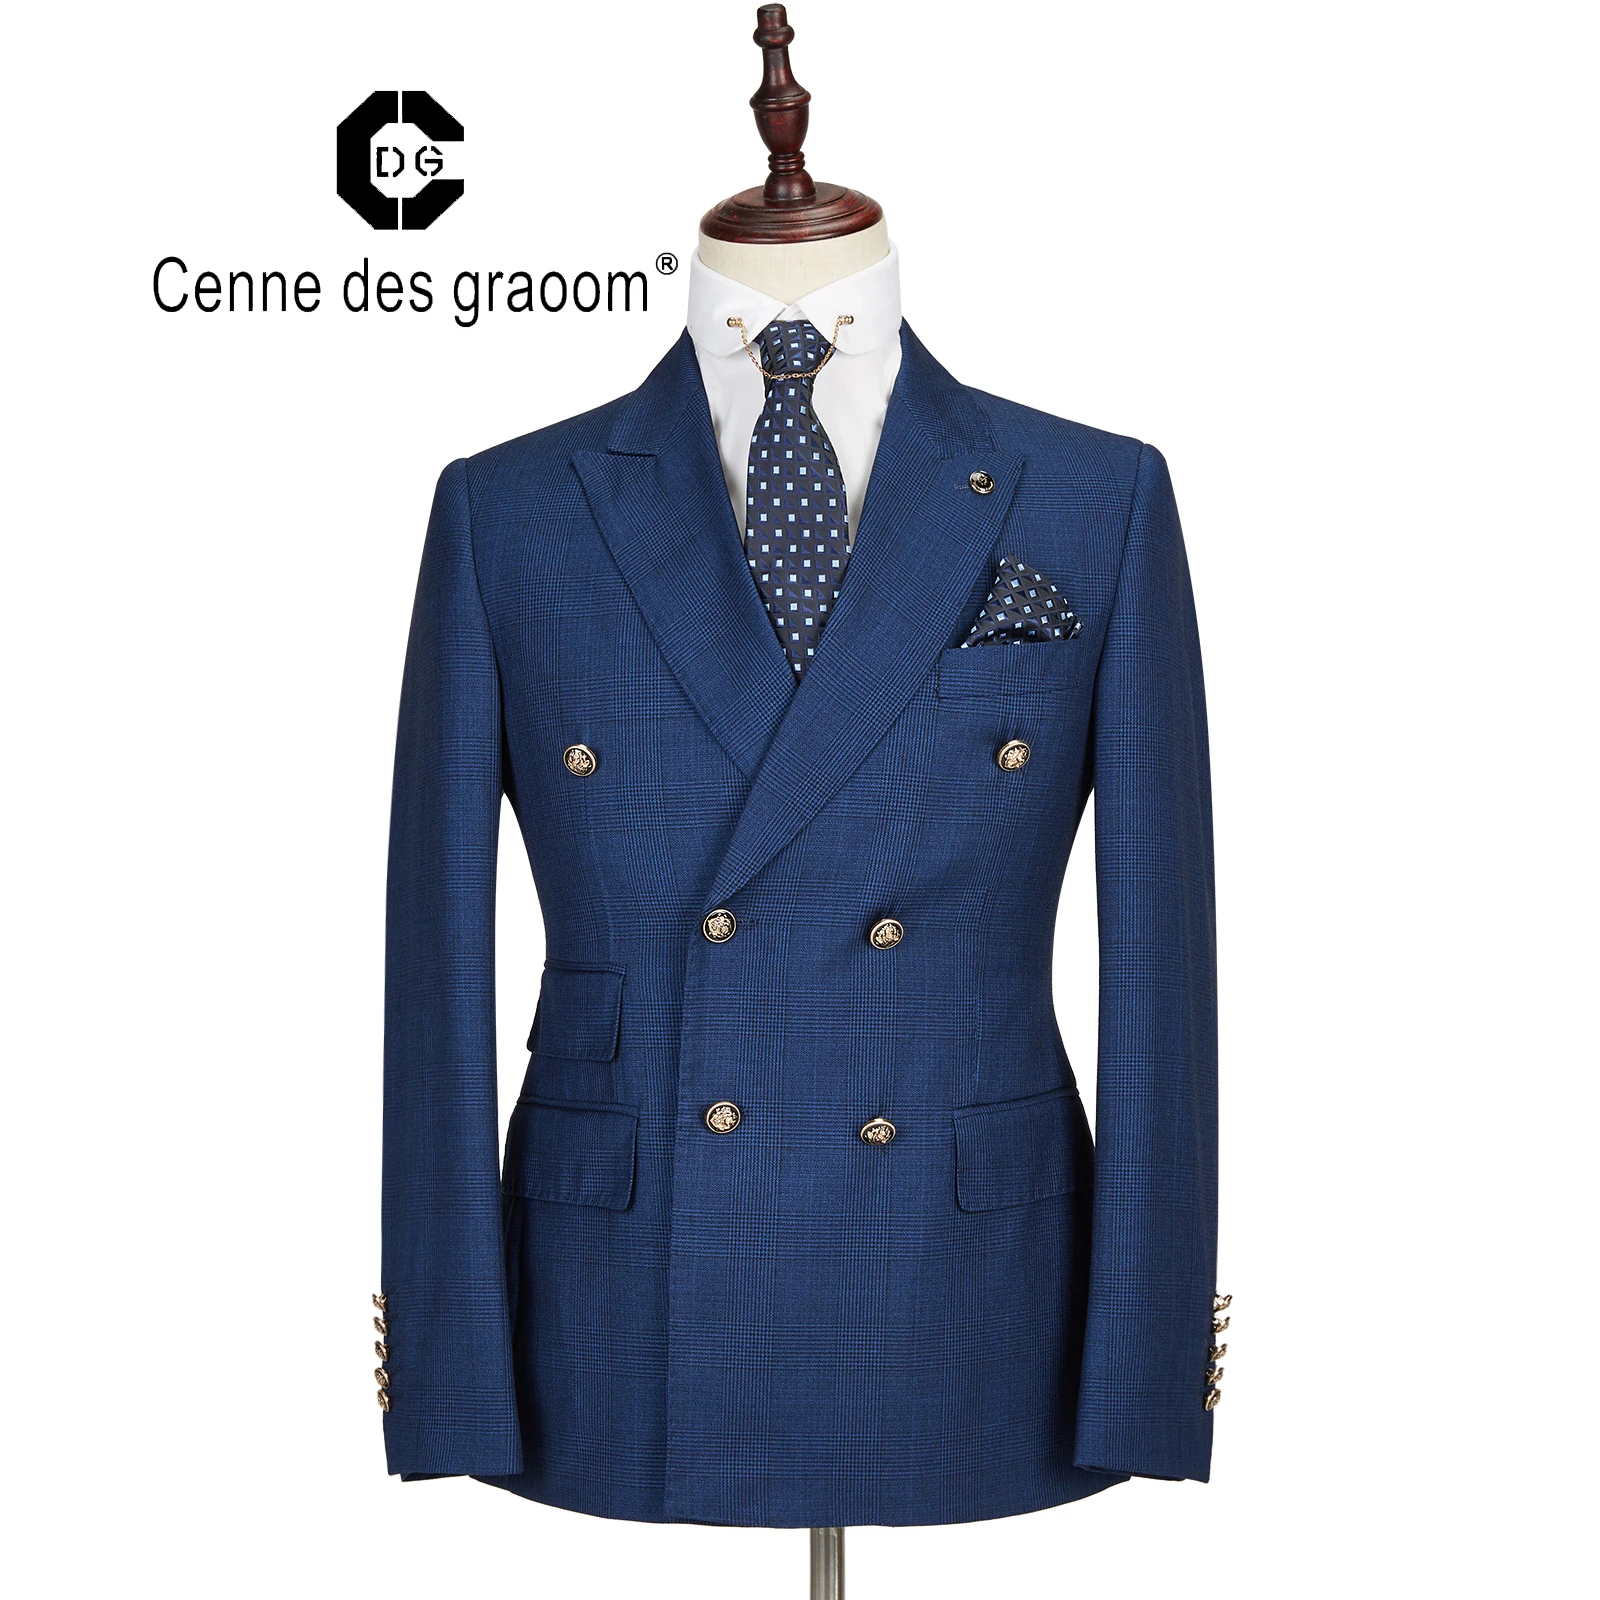 

Mens Suit 2 Piece Slim Fit blue Wedding office double breasted for Cenne des graoom Lapel Blazer Trousers